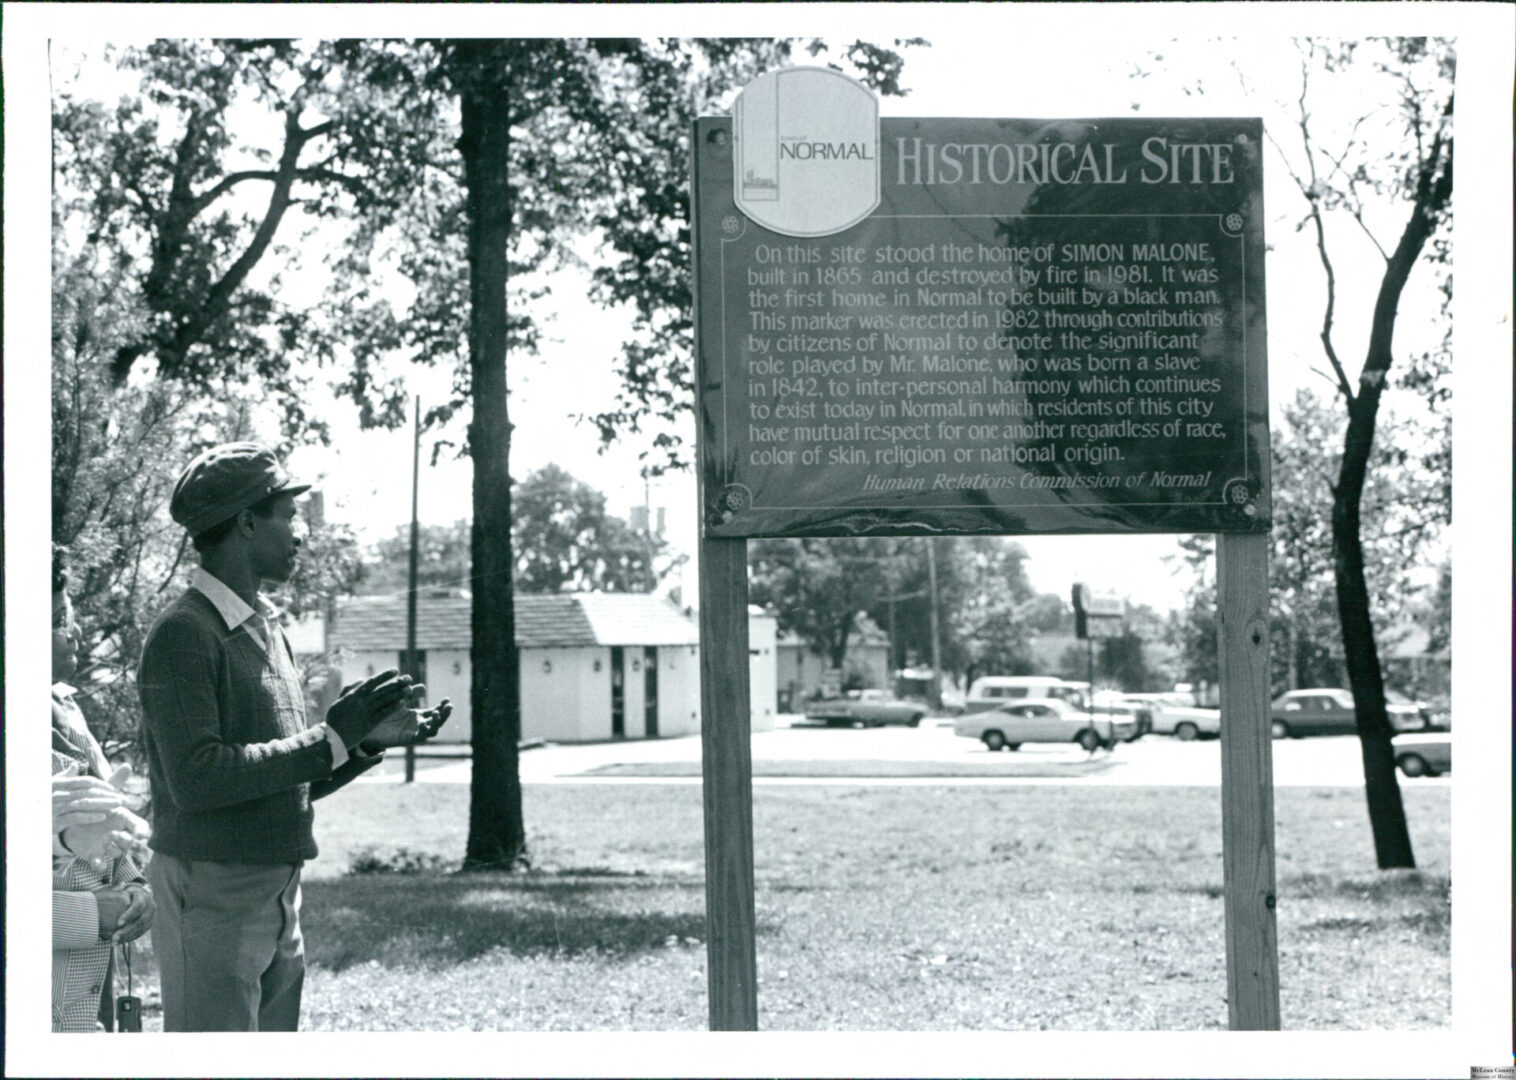 Historic Marker for Early African American Residents in Normal